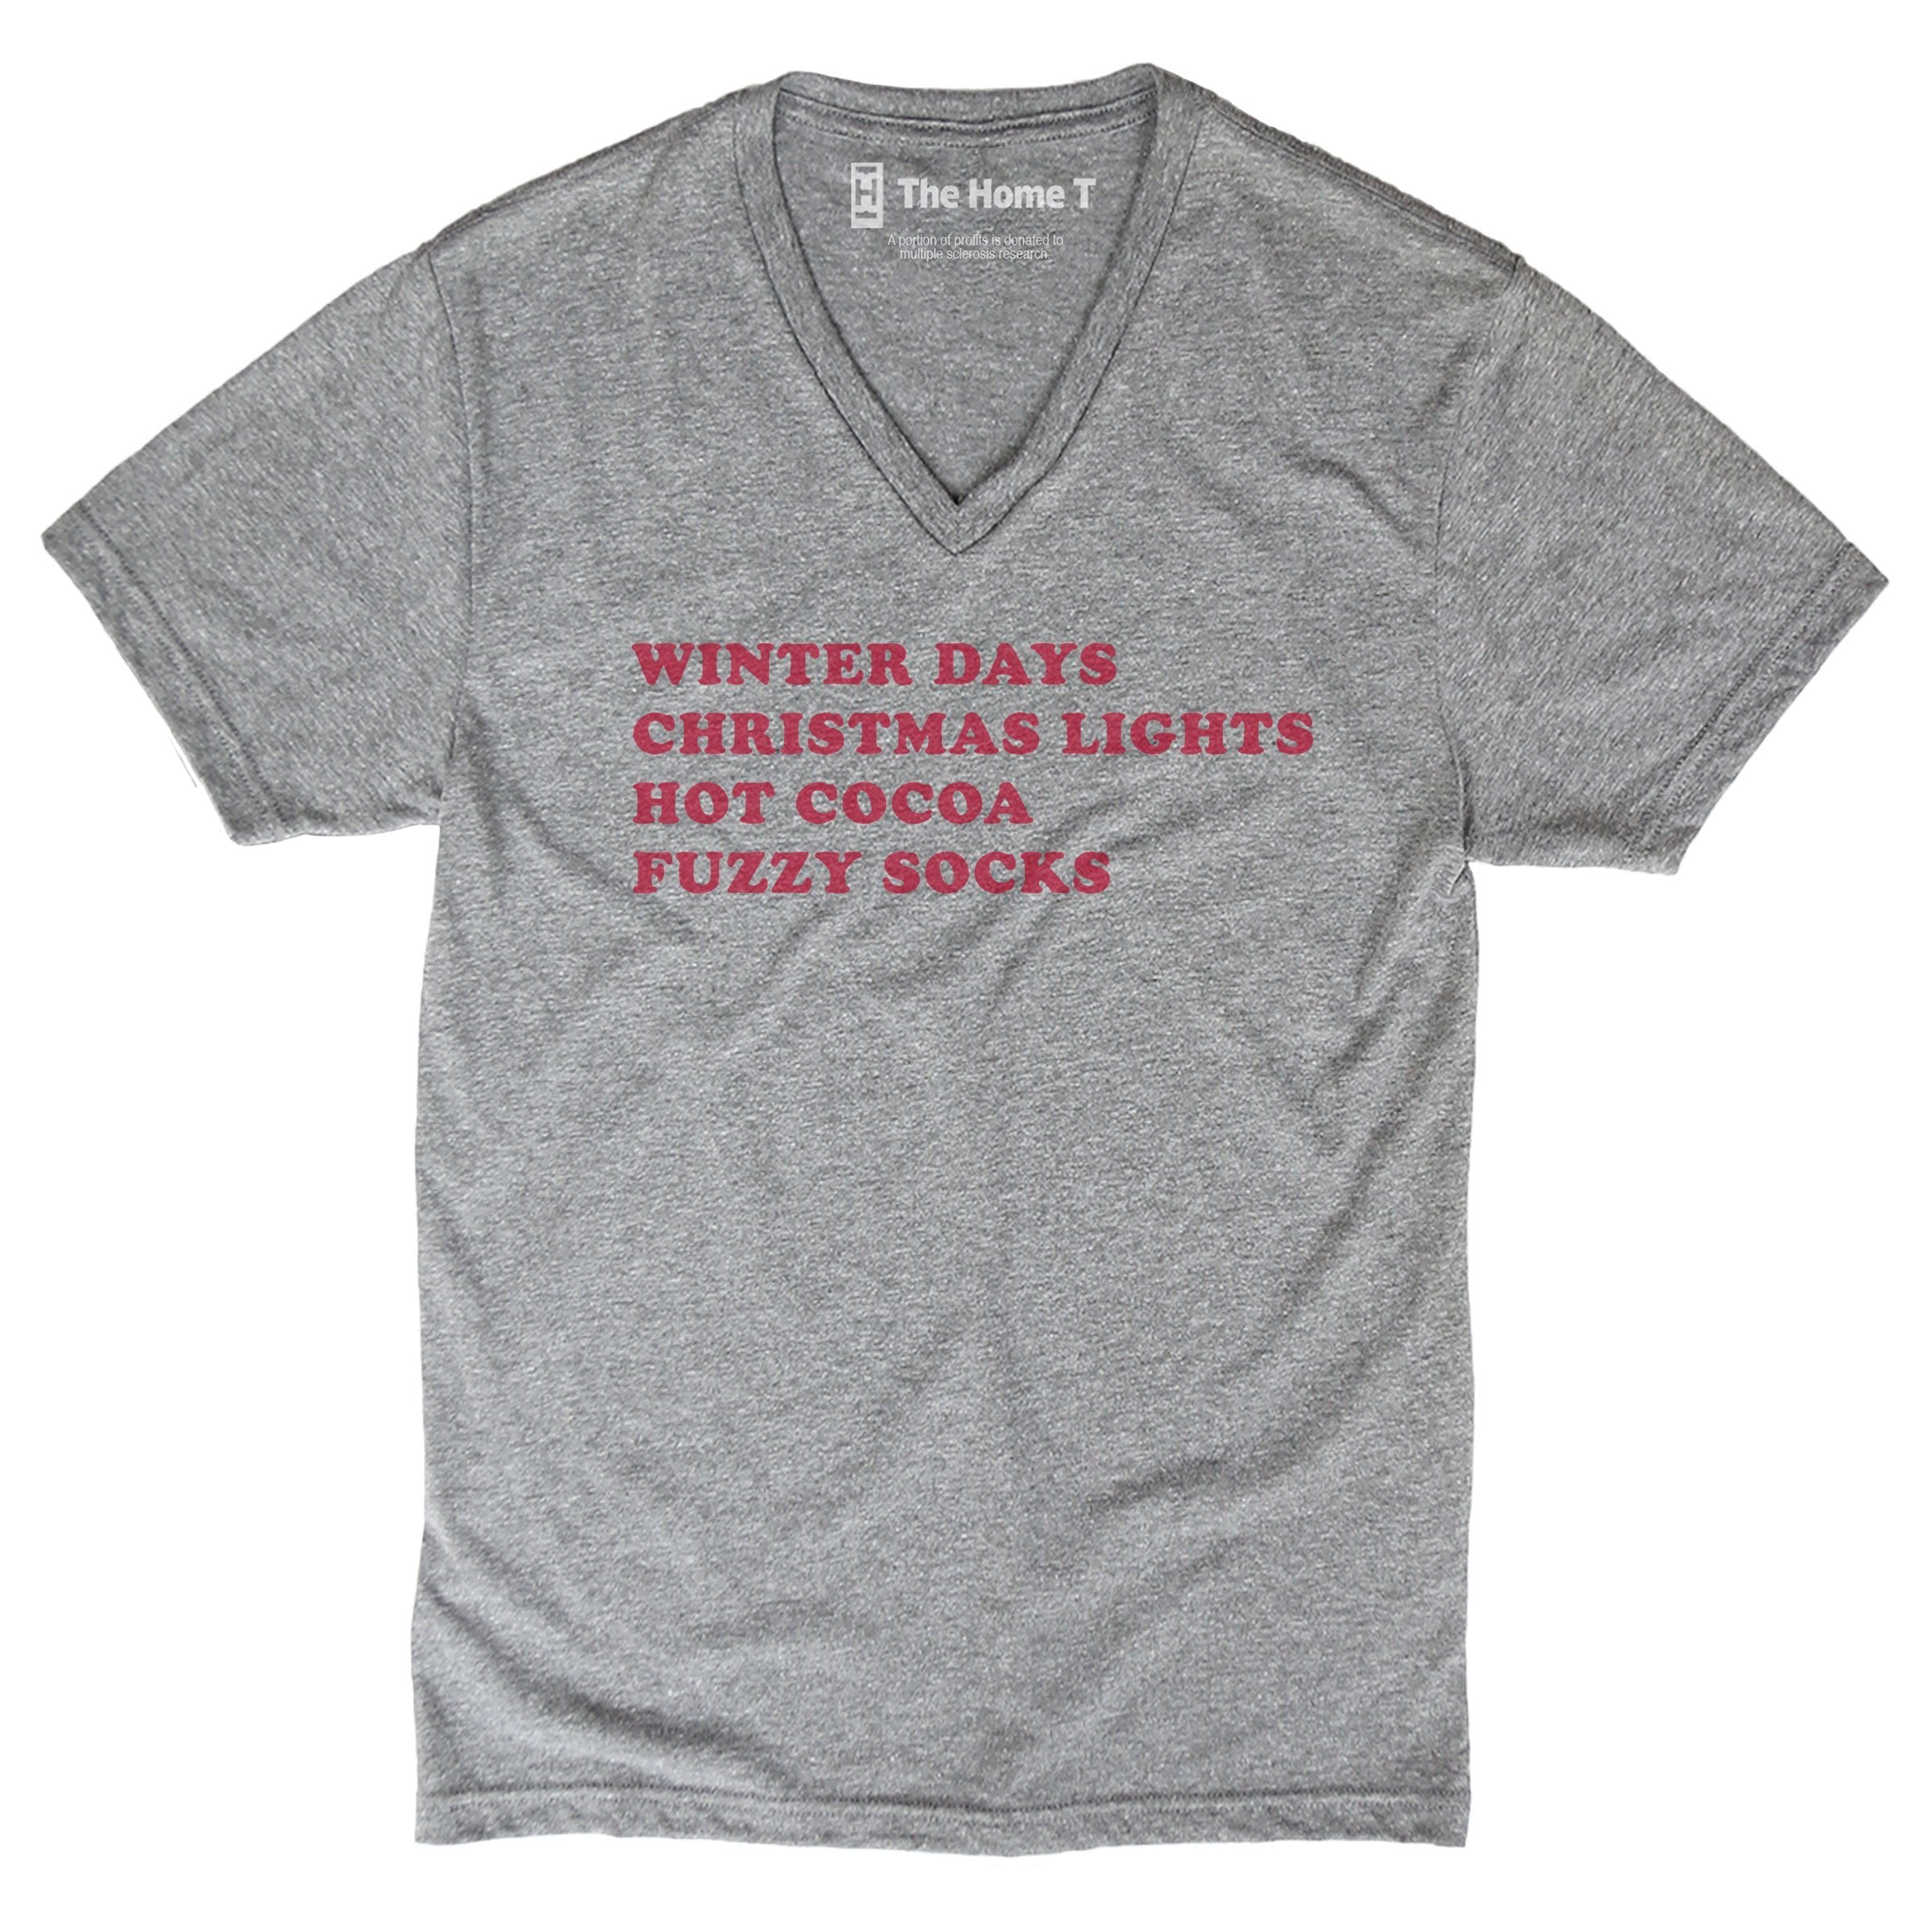 Winter Days Crew neck The Home T